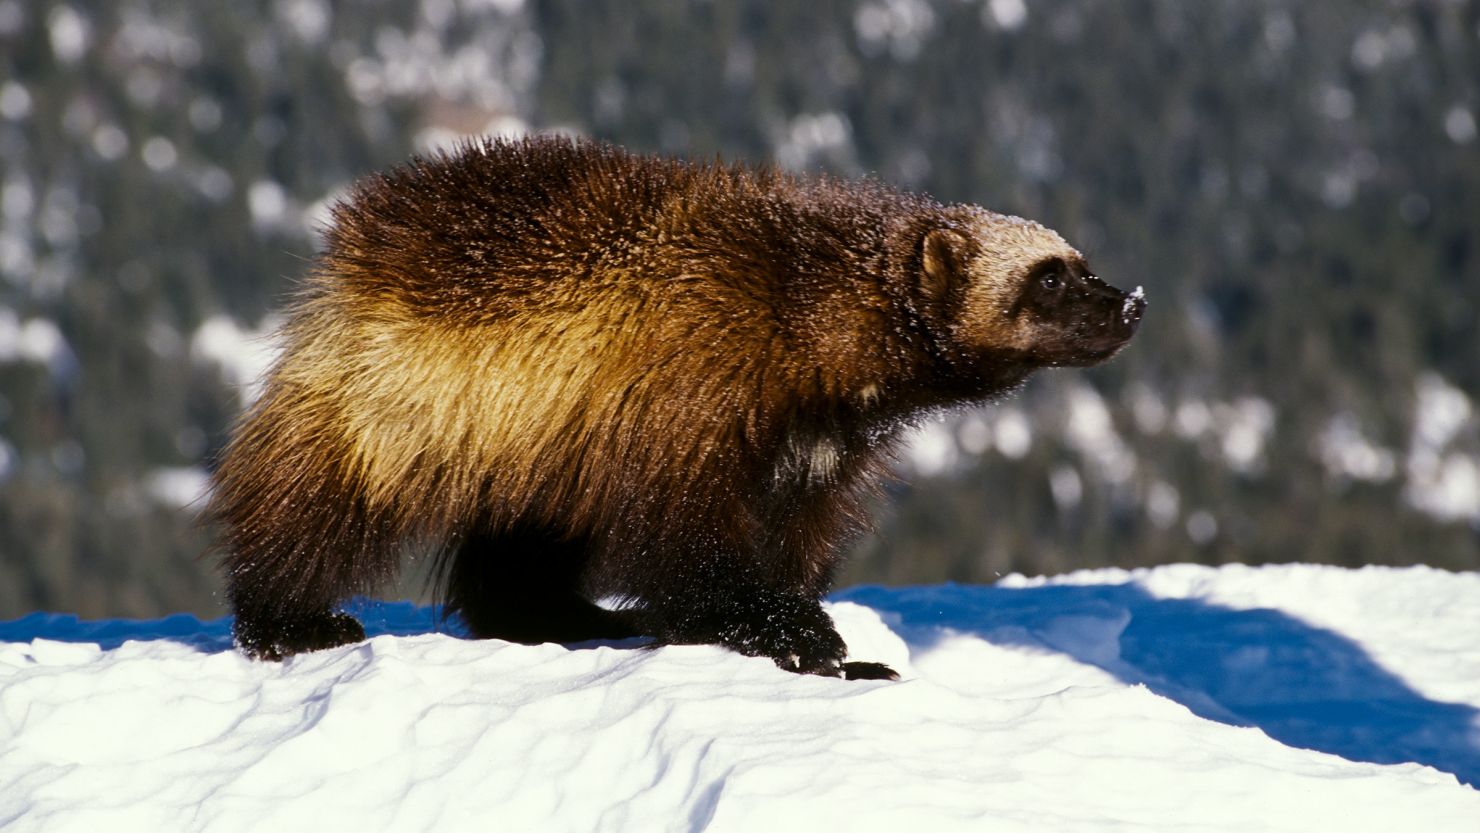 In this file photo, a wolverine is seen in the snow in Montana.